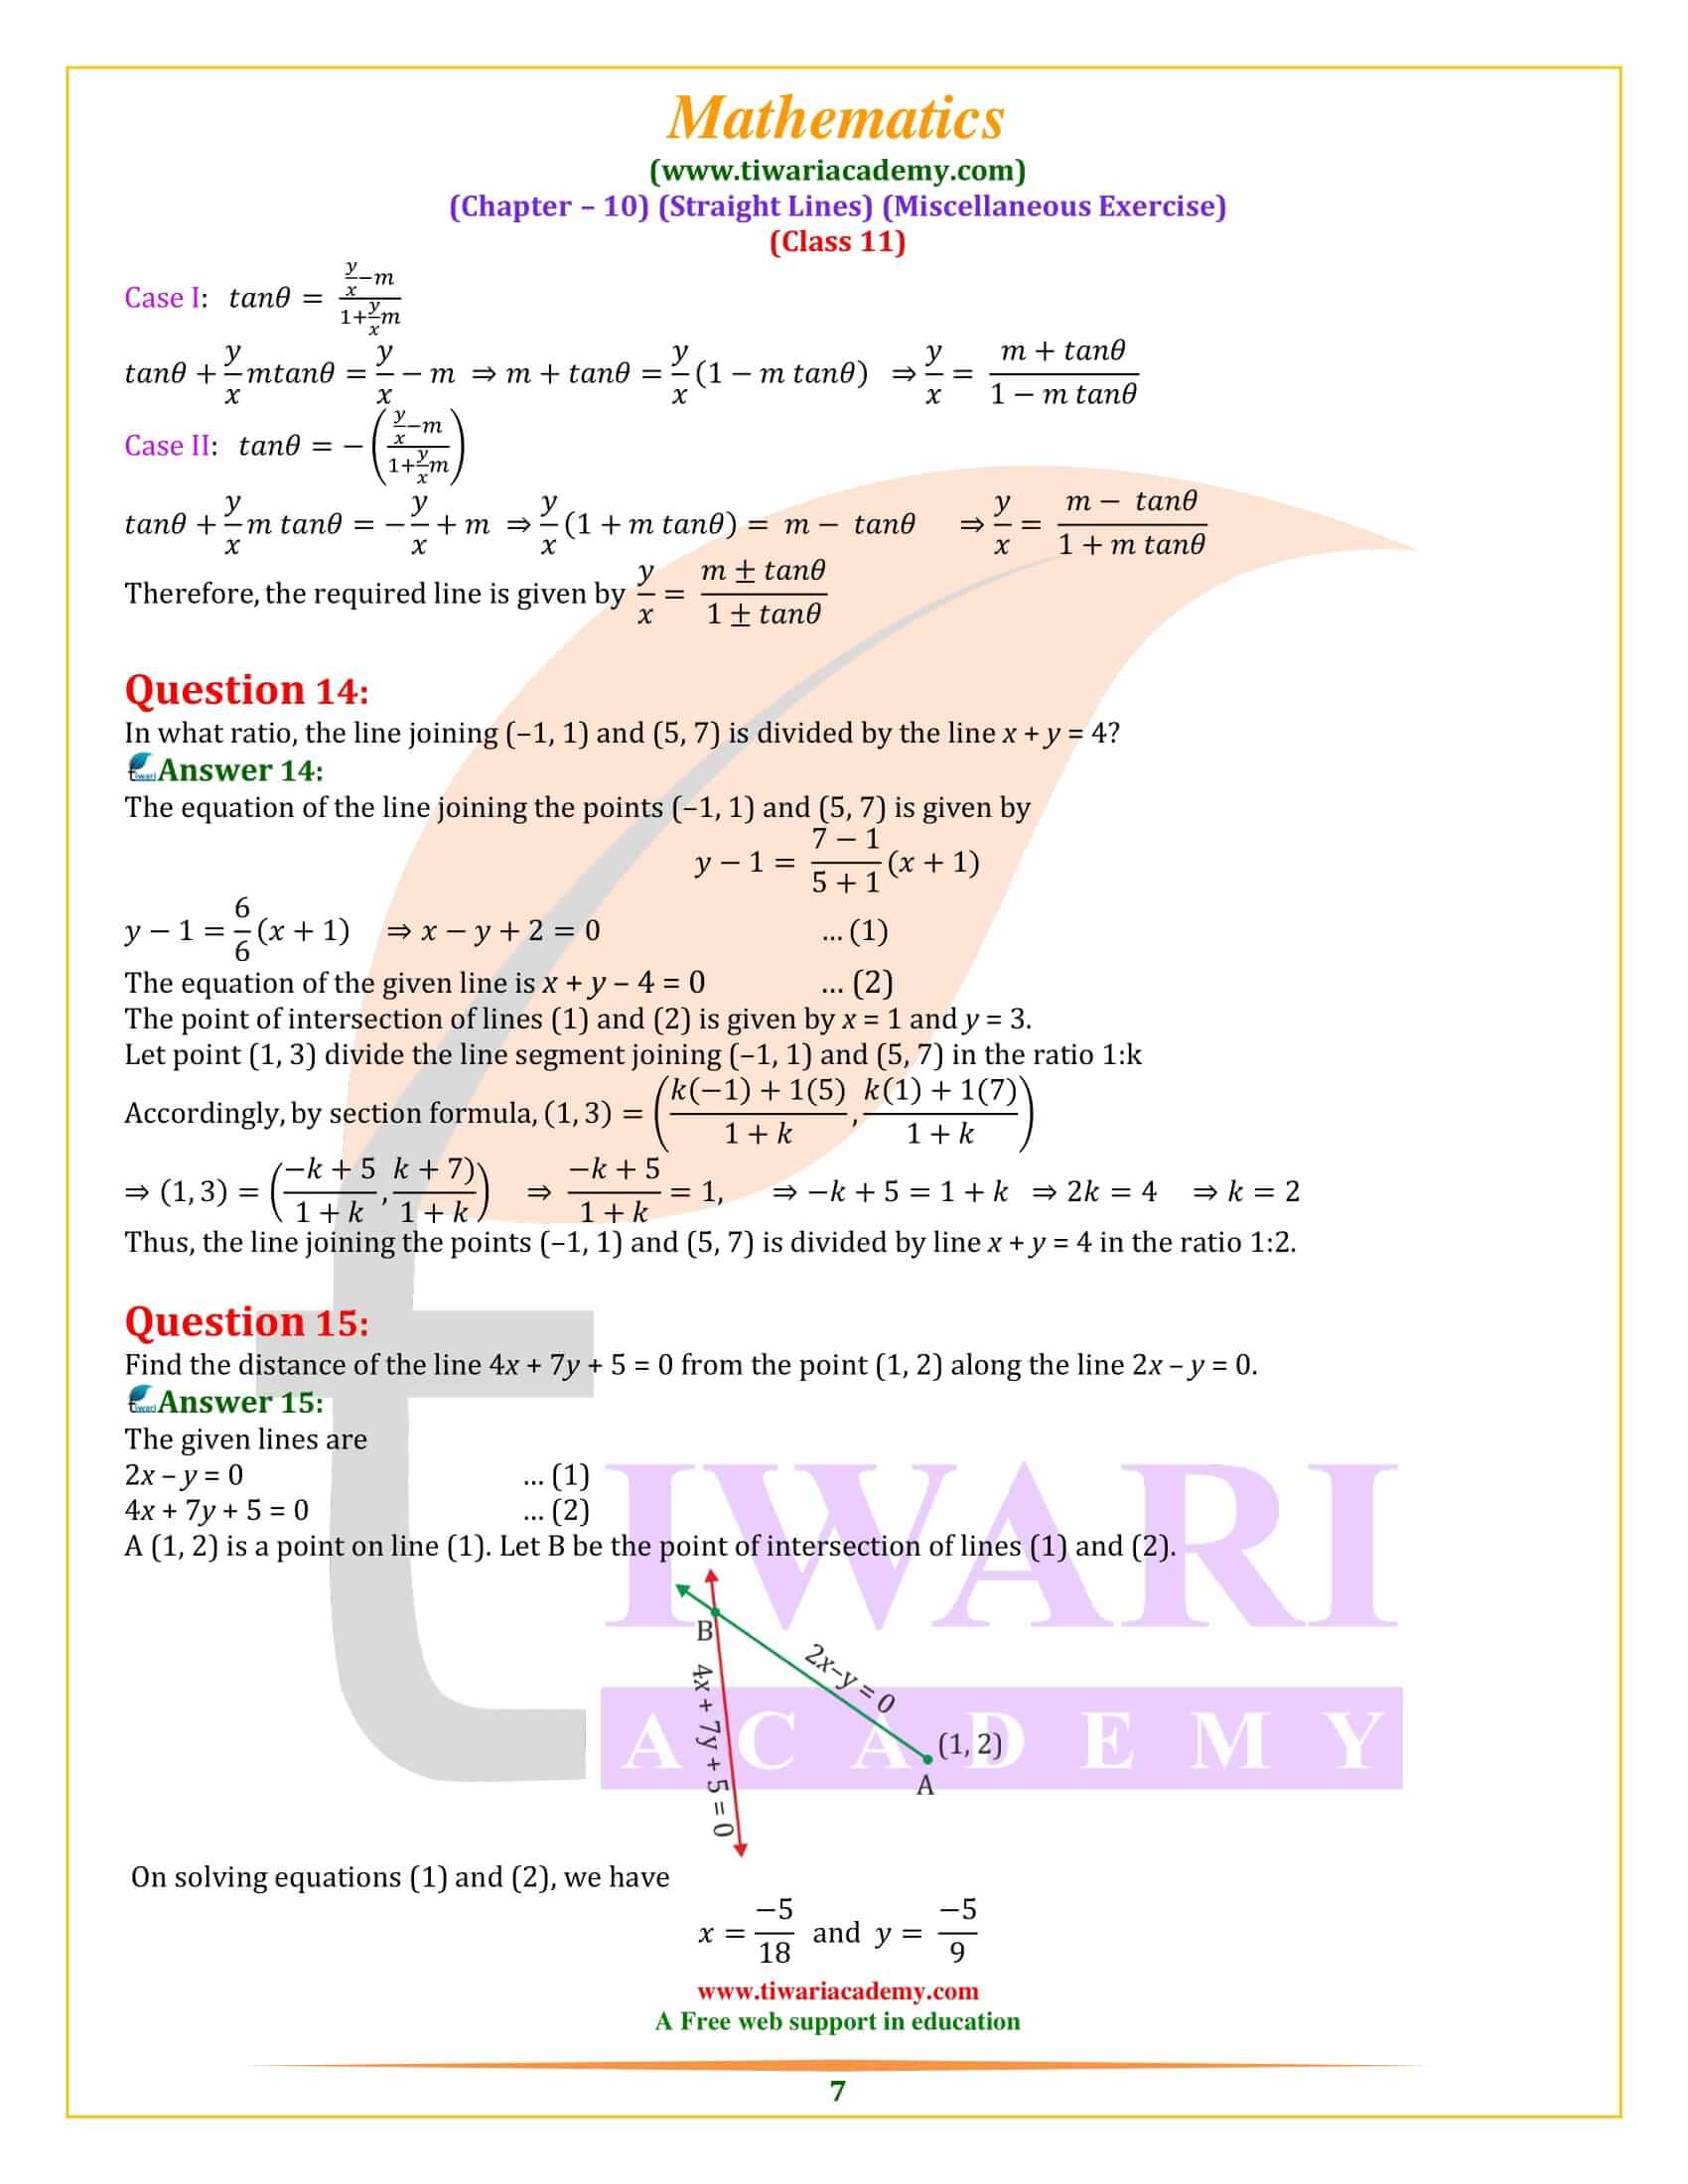 NCERT Solutions for Class 11 Maths Chapter 10 Miscellaneous Exercise updated